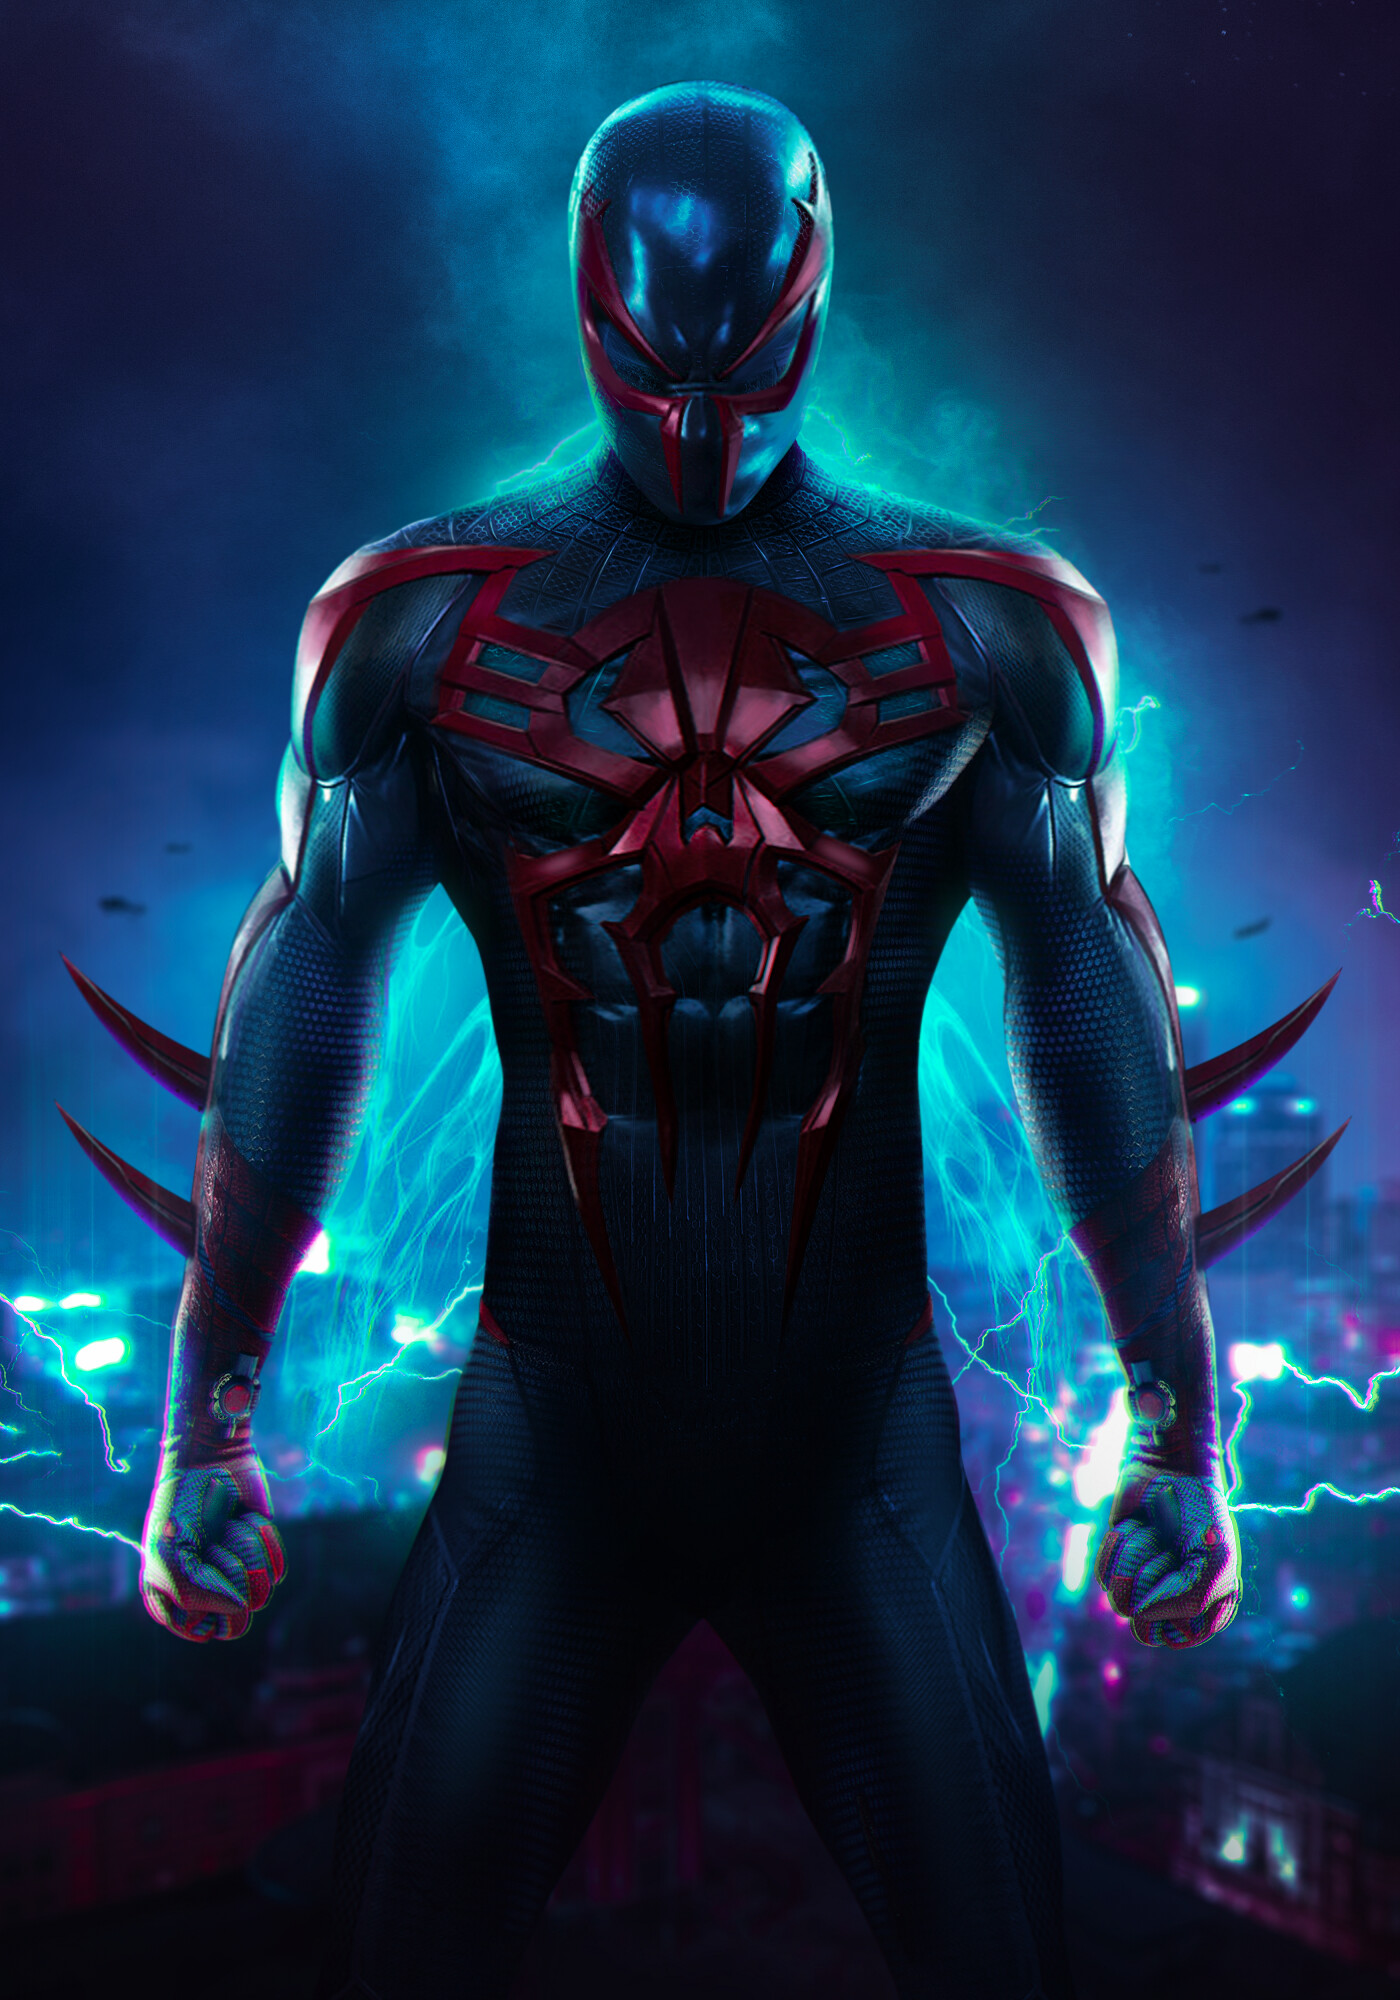 Who is Spider-Man 2099